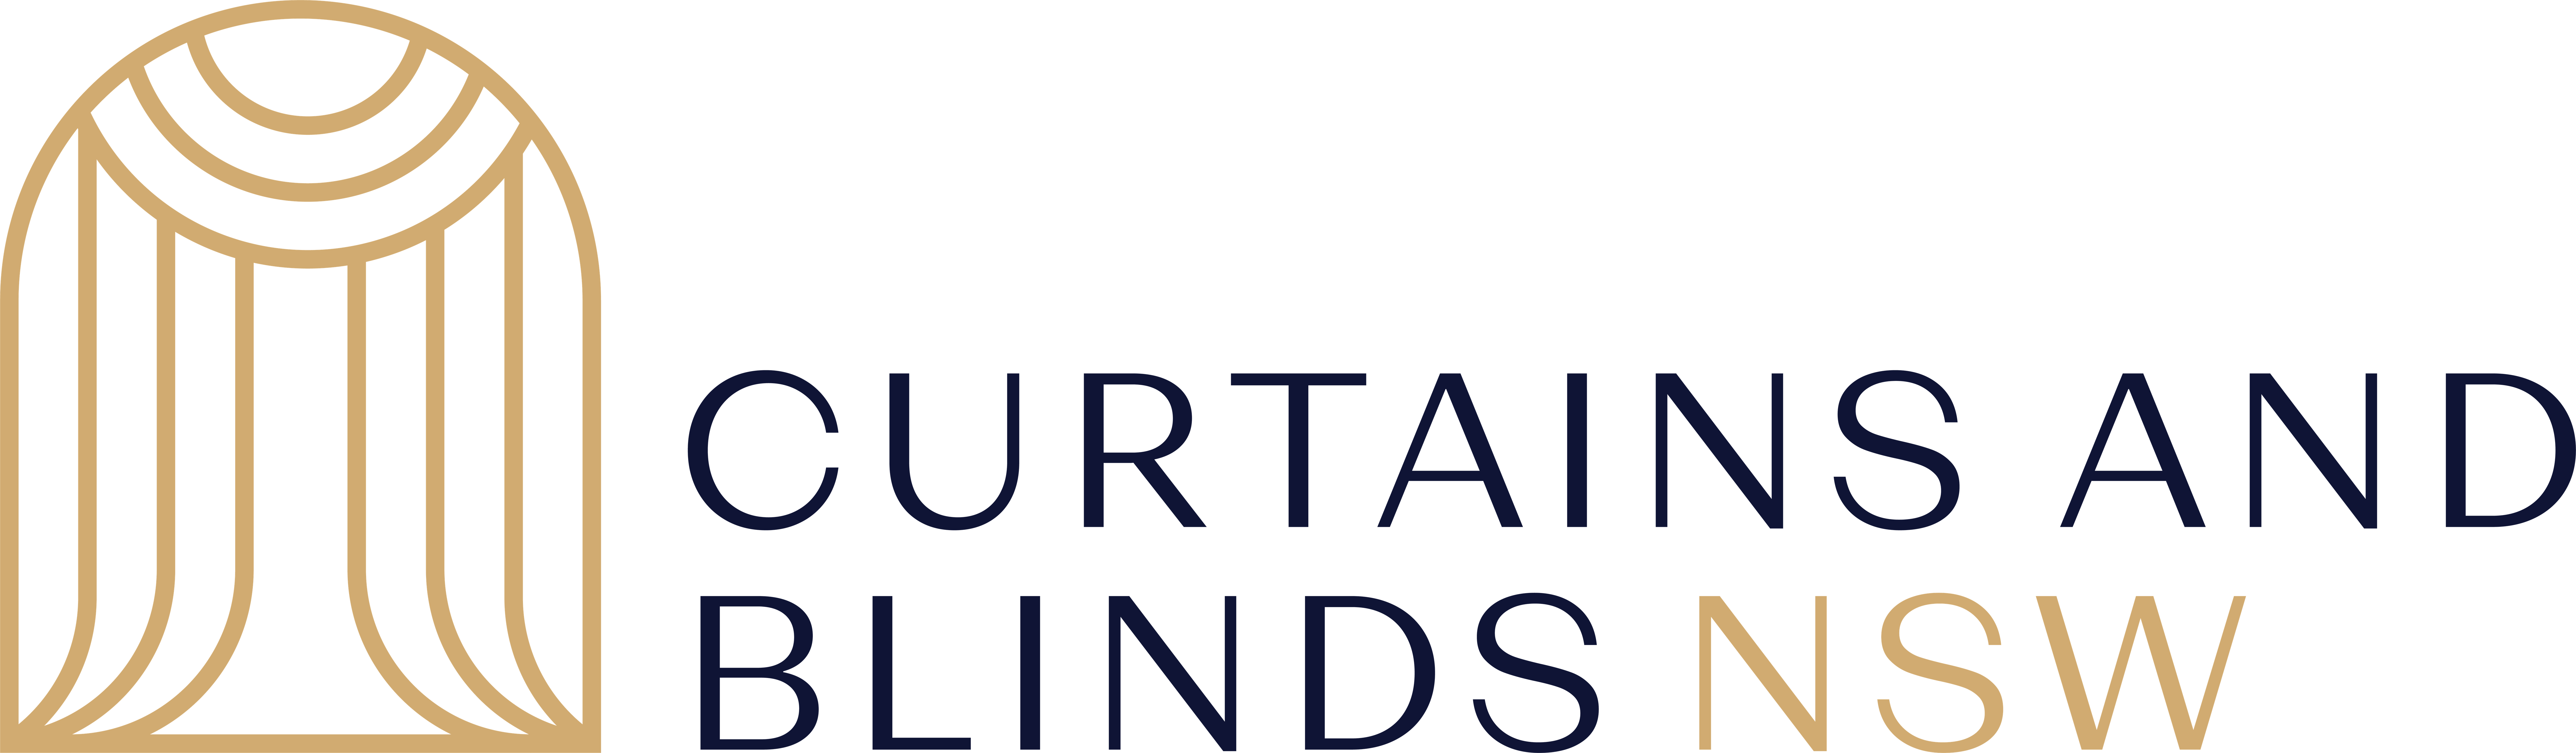 Curtains_and_Blinds_logo_transp_2